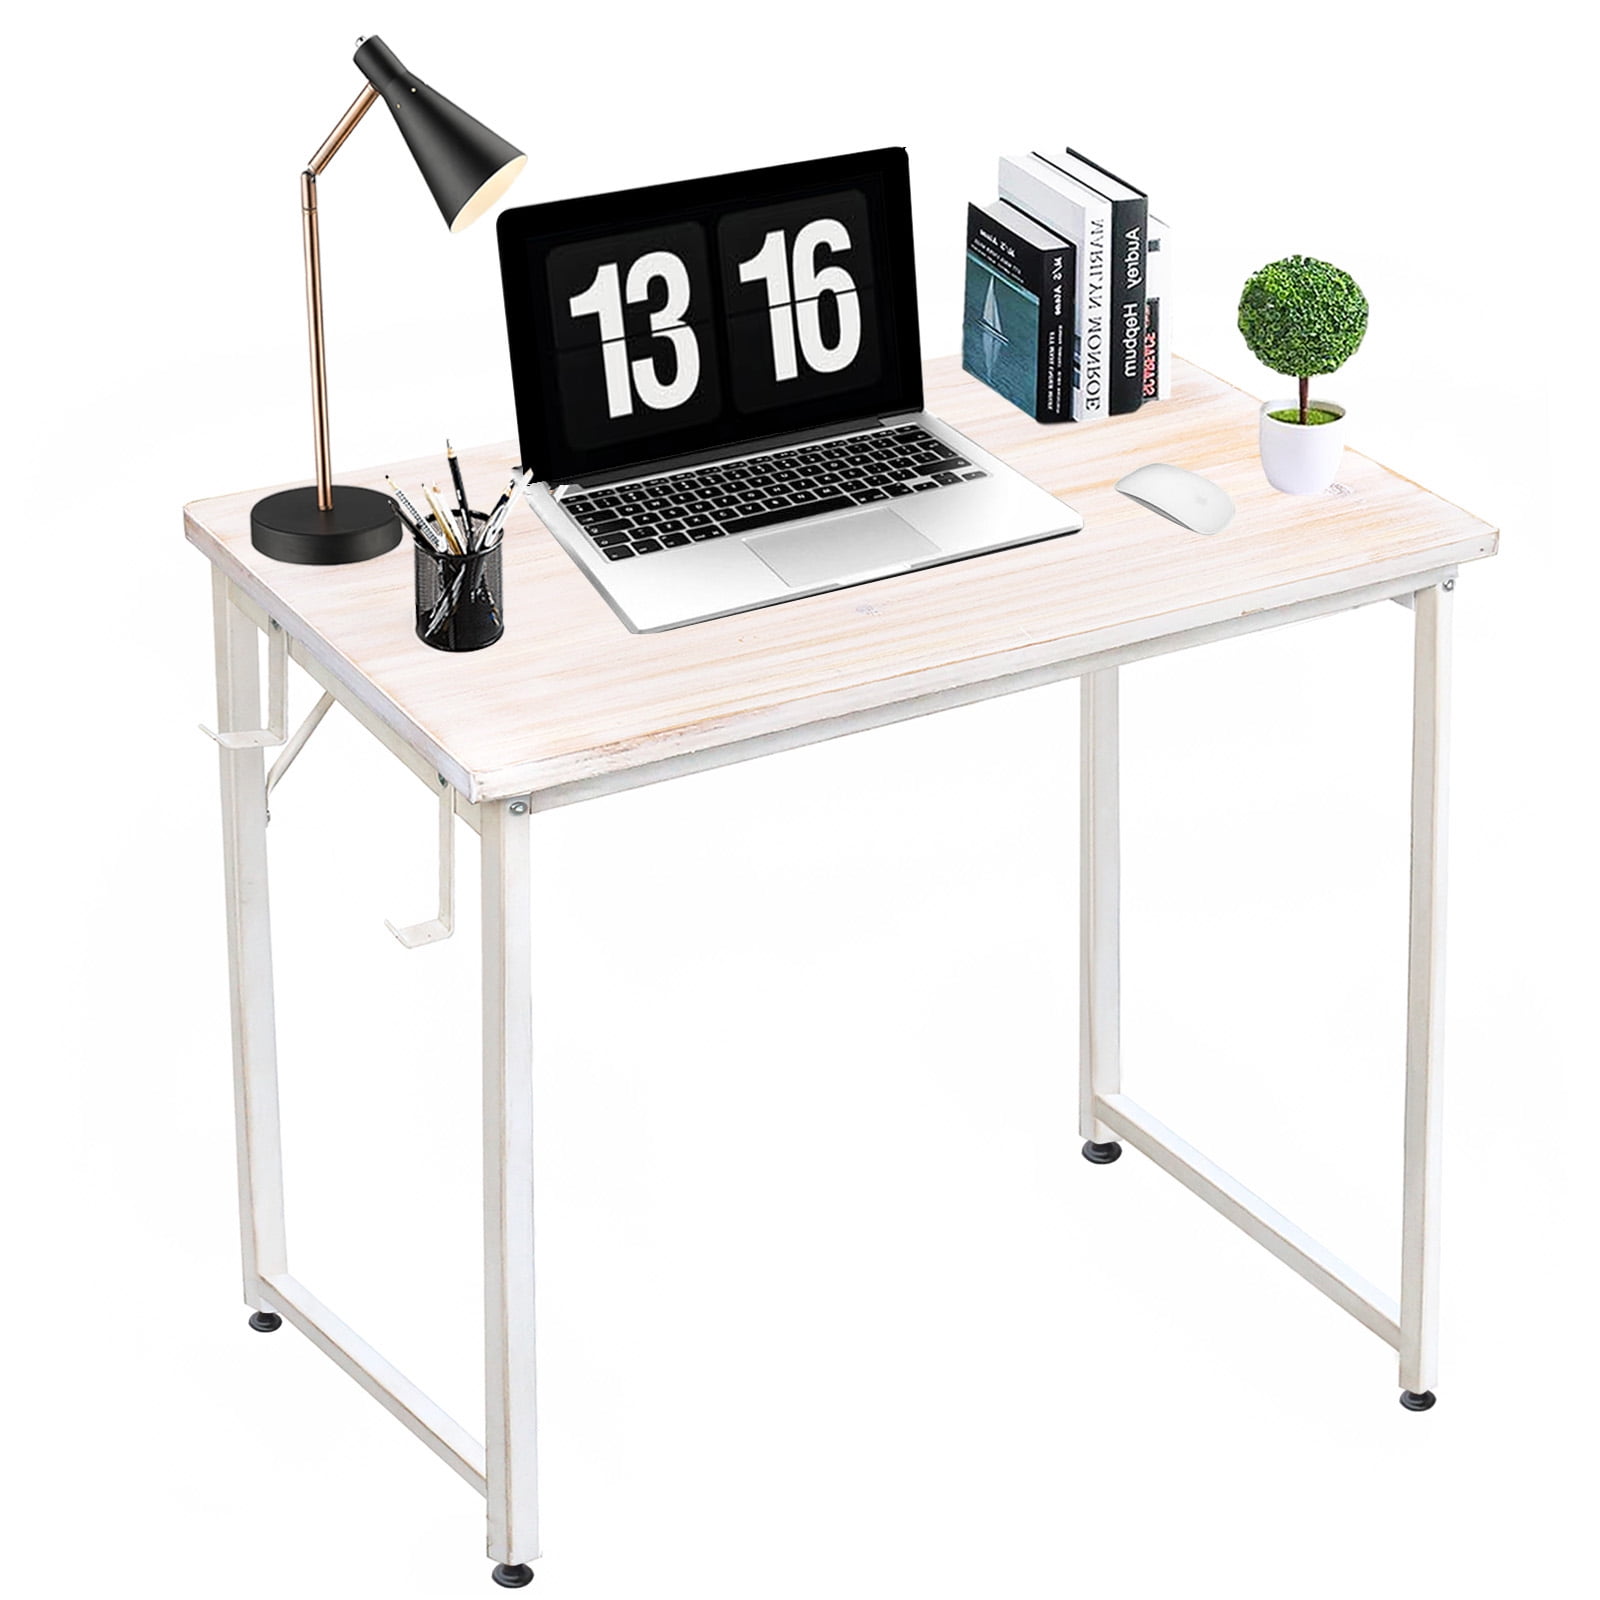  DLisiting Small Desk for Small Spaces - Student Kids Study  Writing Computer Table for Bedroom School Work PC Workstation,Rustic 30 31  Inch : Home & Kitchen